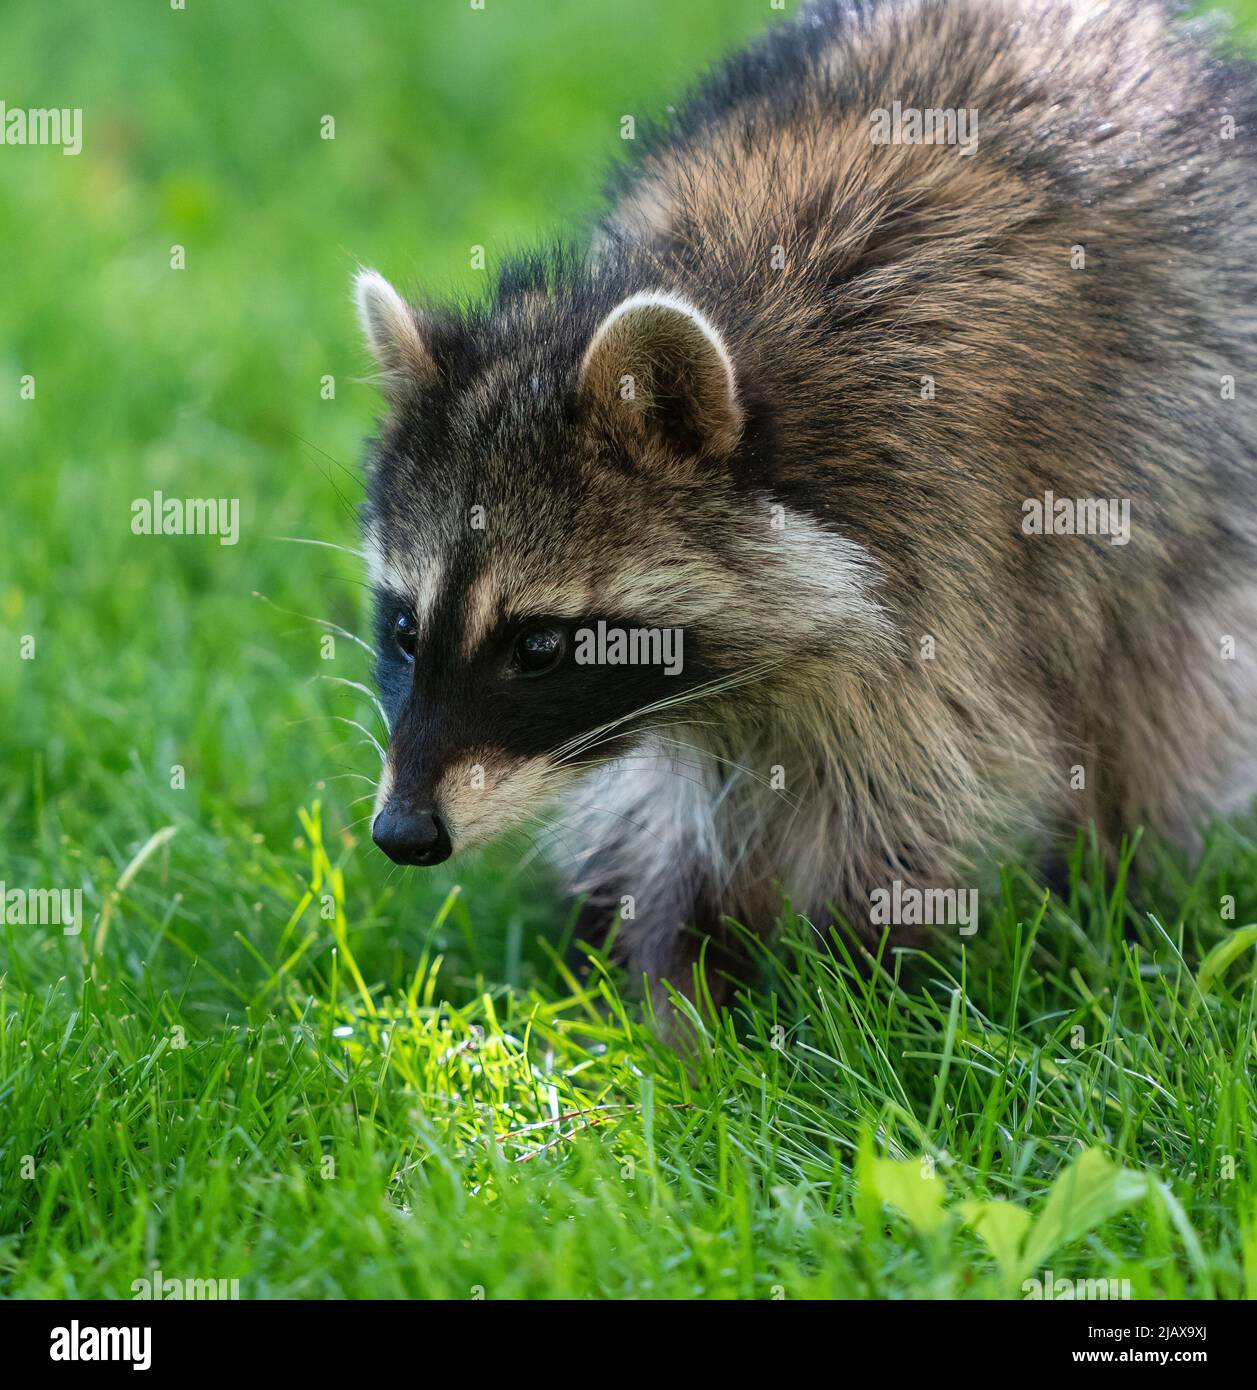 Close up portrait of a wild Masked Bandit Raccoon on a green grass lawn. Stock Photo